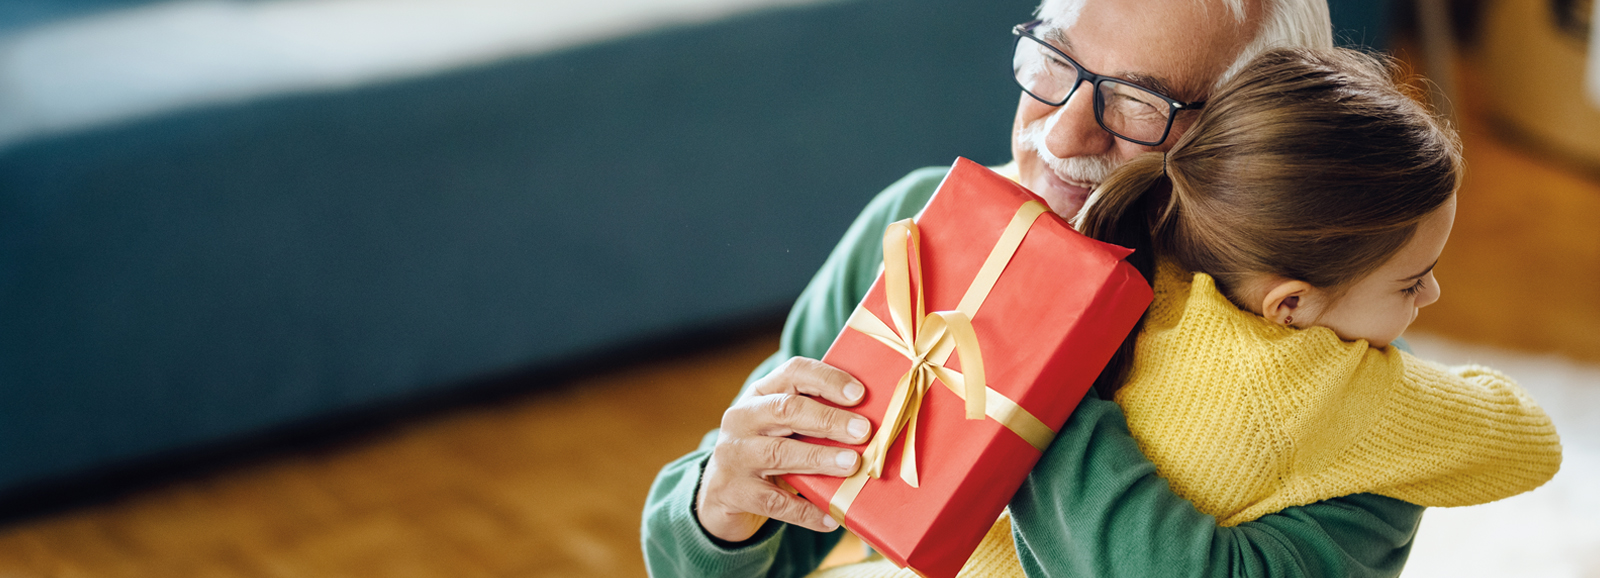 grandfather-with-gift-1600x578.jpg